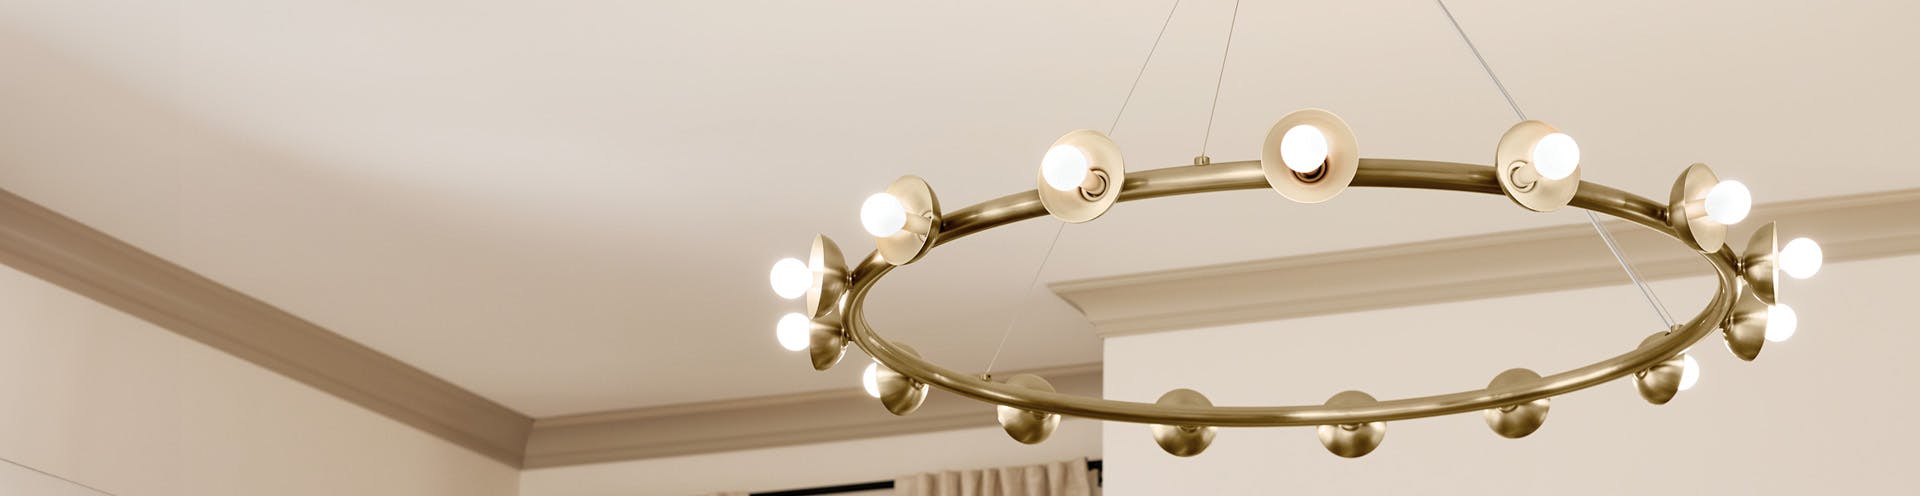 Palta 15-light chandelier in champagne bronze finish hanging from a white ceiling